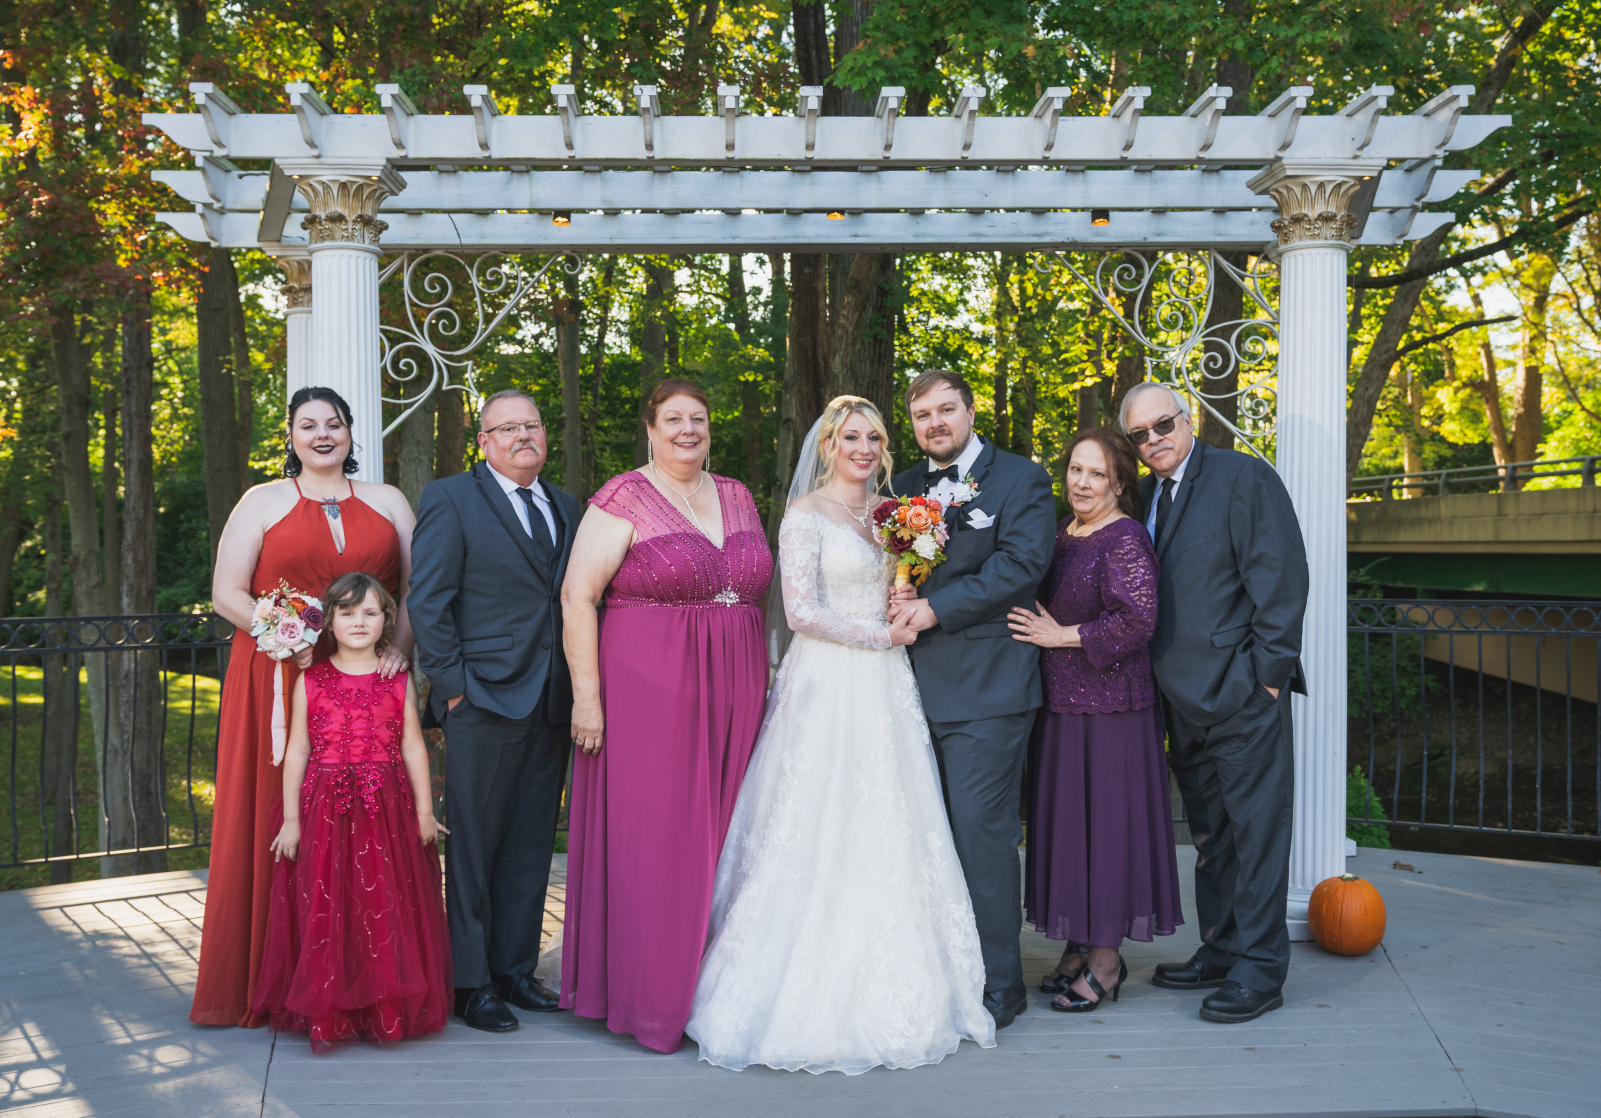 Bride and groom, maid of honor, flower girl, with family, family portrait, wooden arch with columns, nature, green, trees, fall wedding, cute outdoor wedding ceremony at Grand Pacific Wedding Gardens